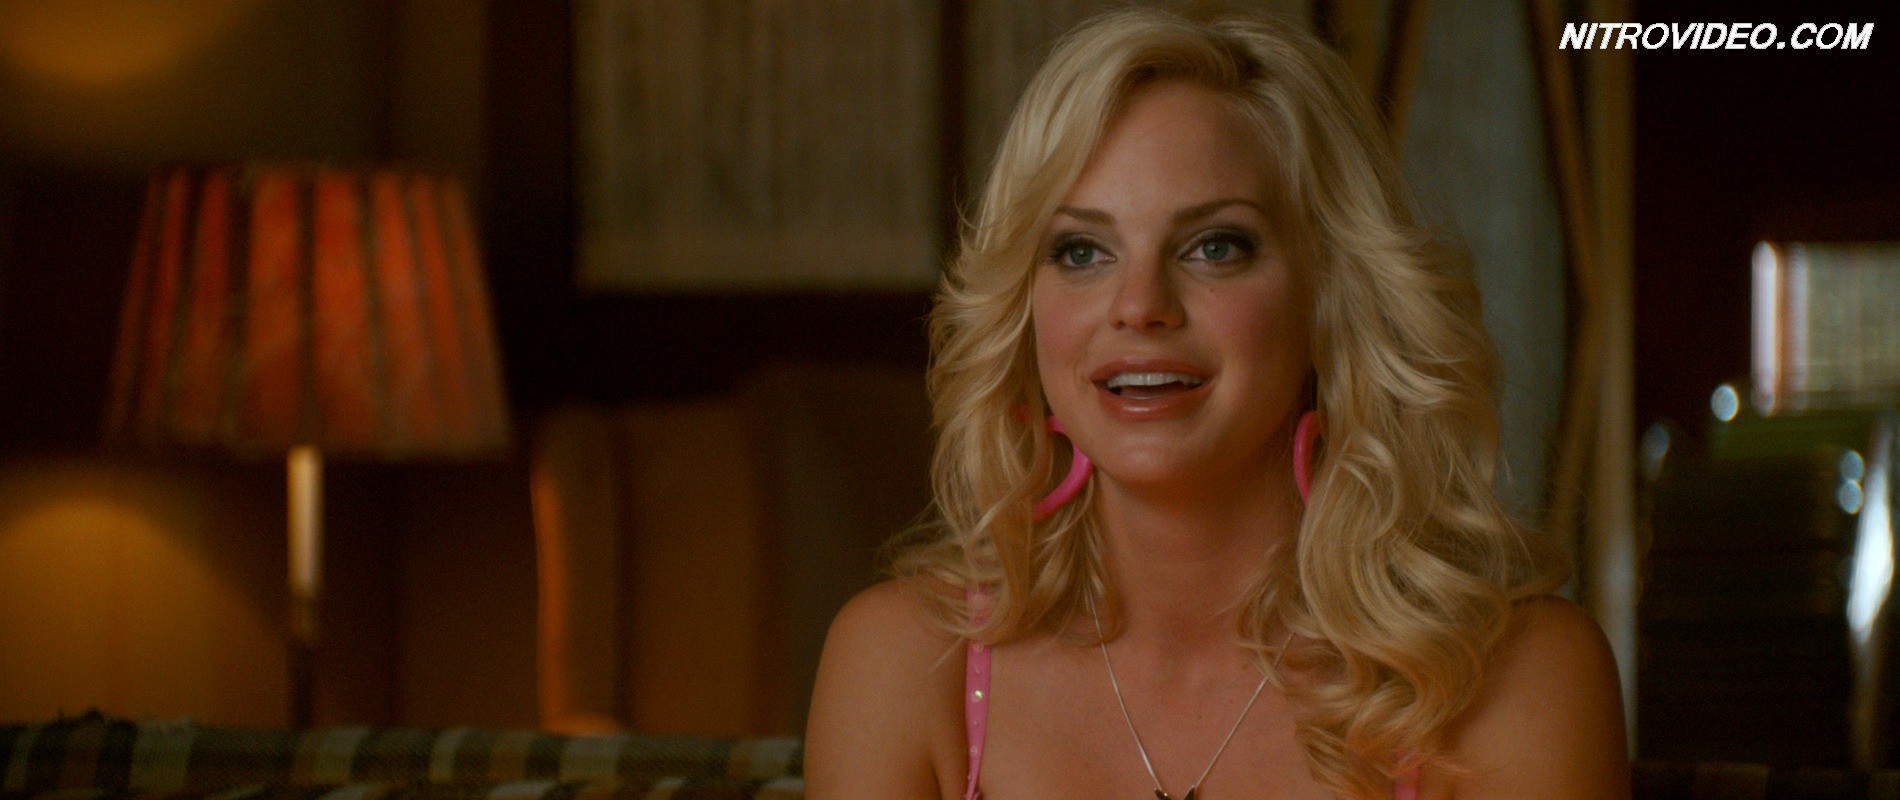 Sexual blonde Anna Faris in The House Bunny #70321881